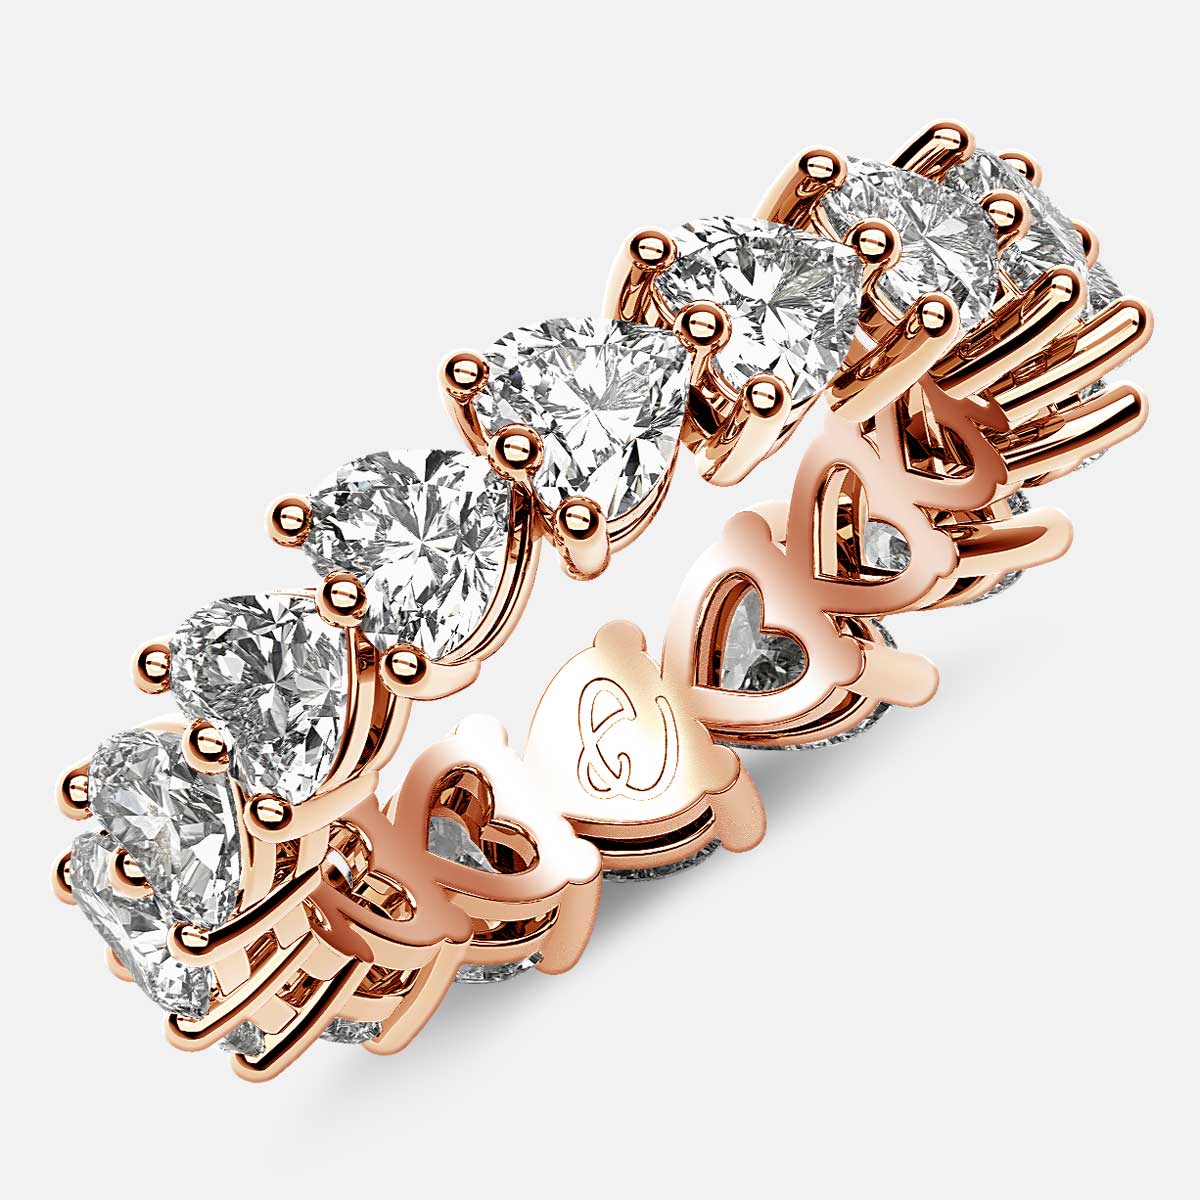 Heart Shaped Diamond Eternity Ring and Band Online - Eternity US